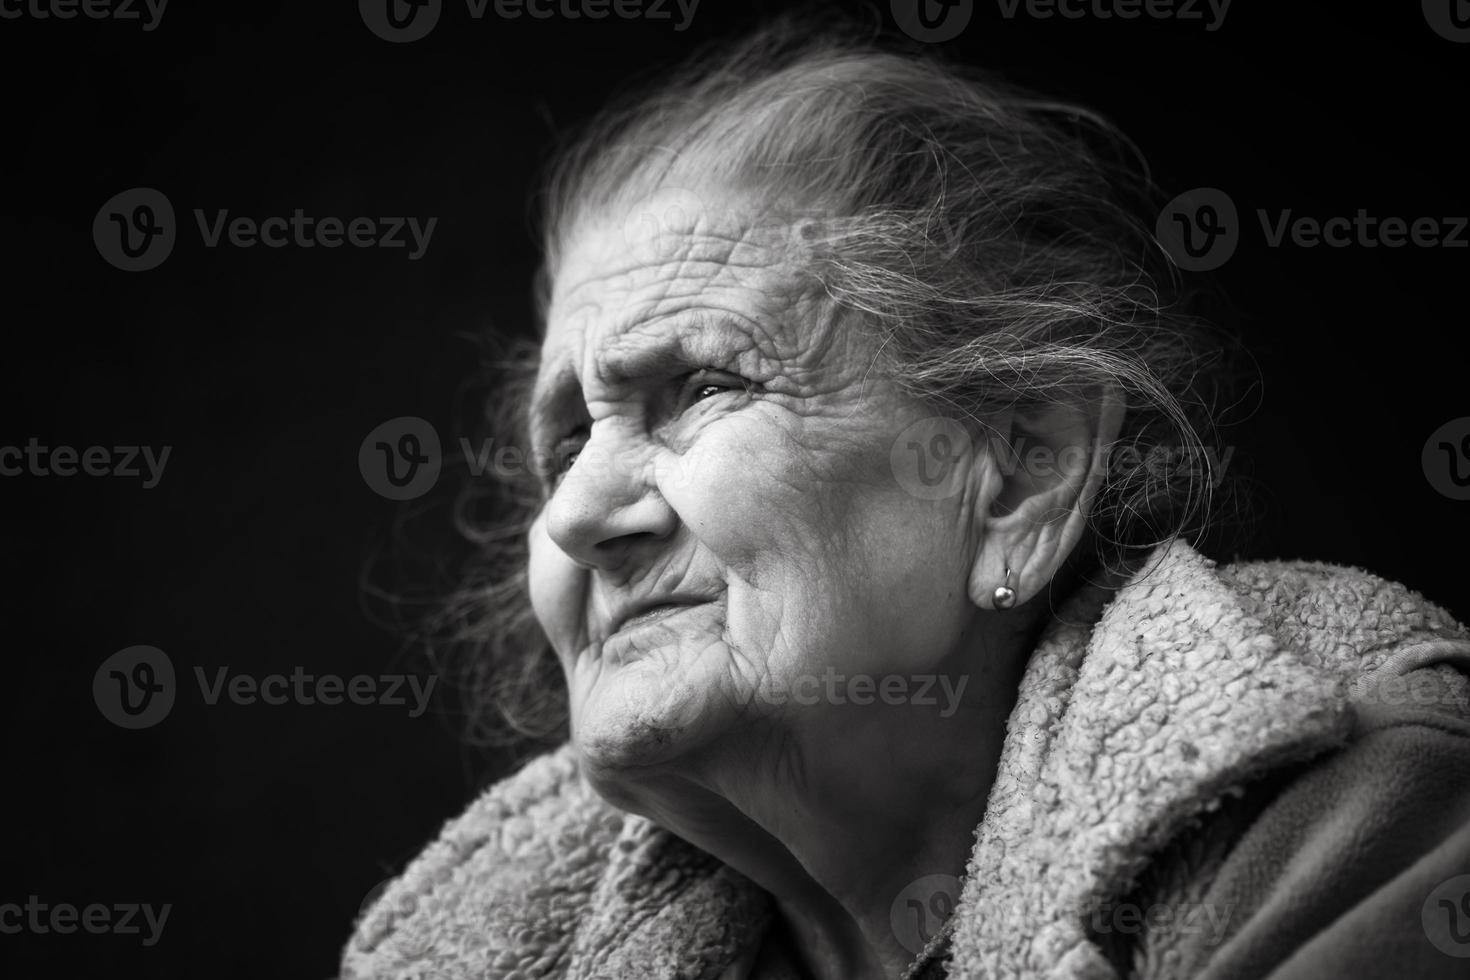 Very old and tired wrinkled woman outdoors photo